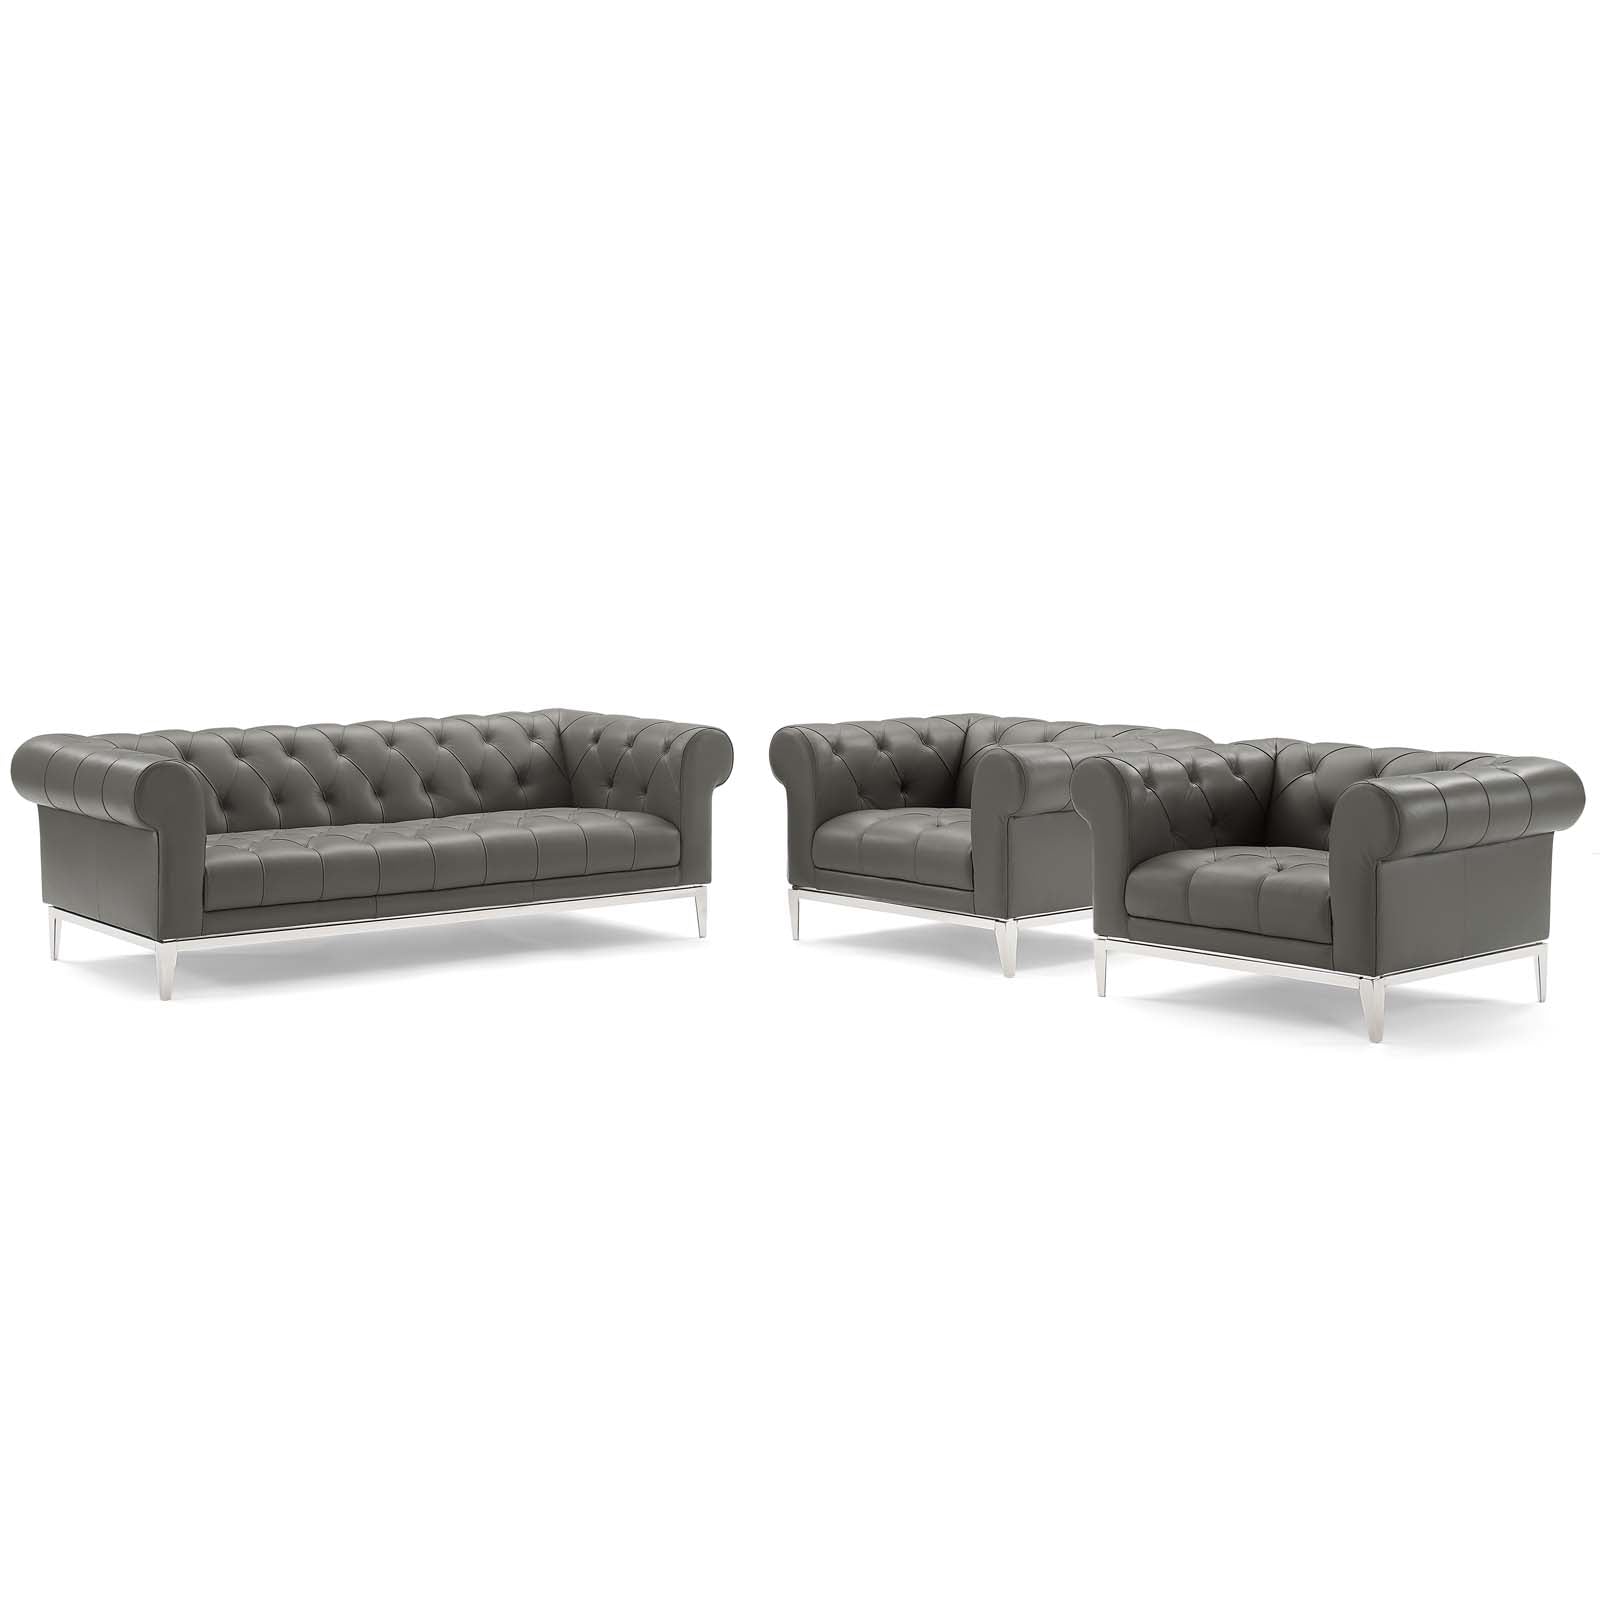 Idyll Tufted Upholstered Leather 3 Piece Set - East Shore Modern Home Furnishings